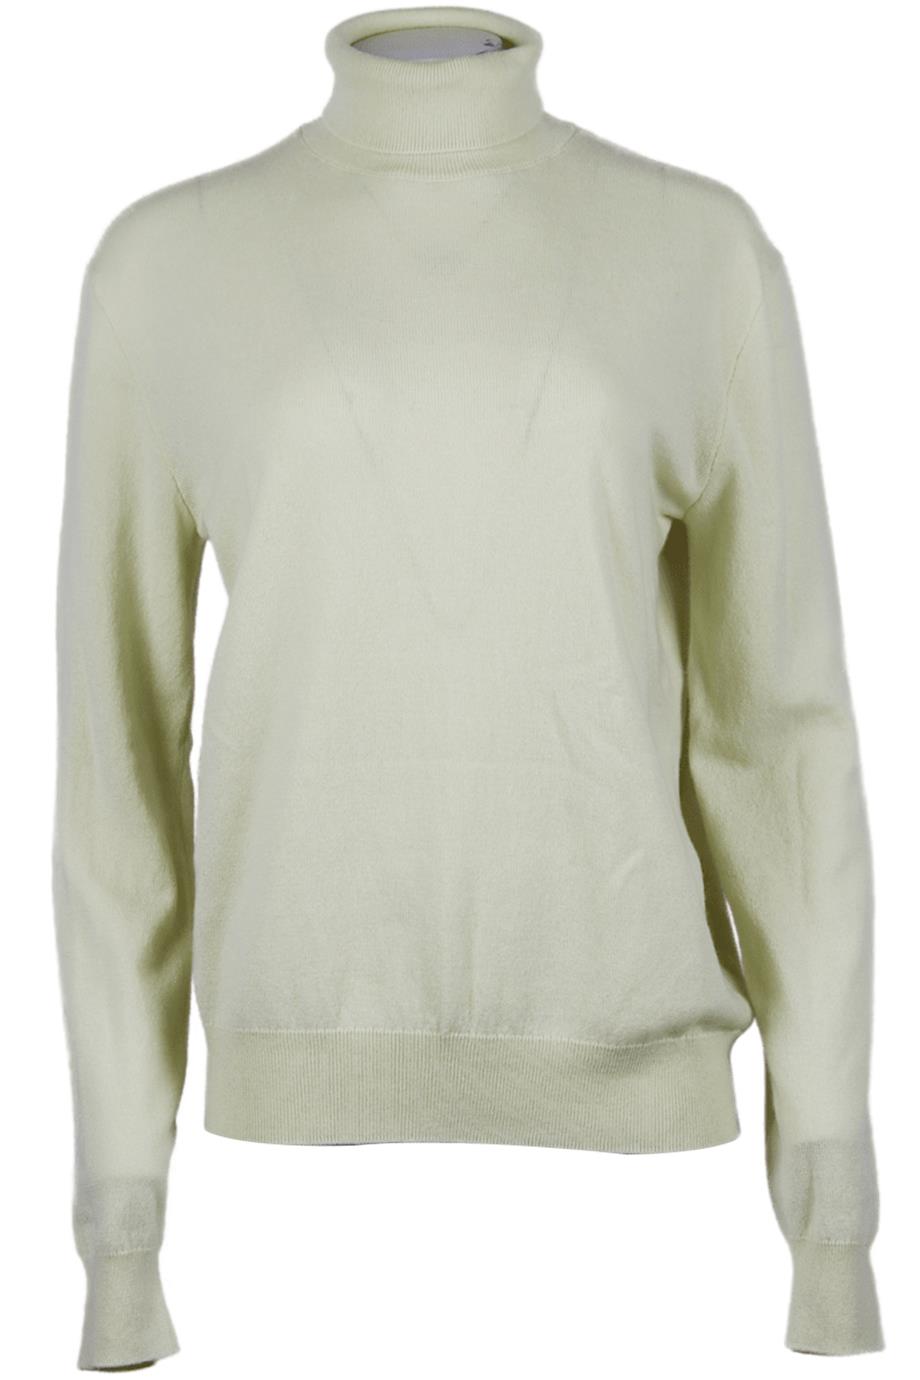 THE ROW CASHMERE TURTLENECK SWEATER SMALL